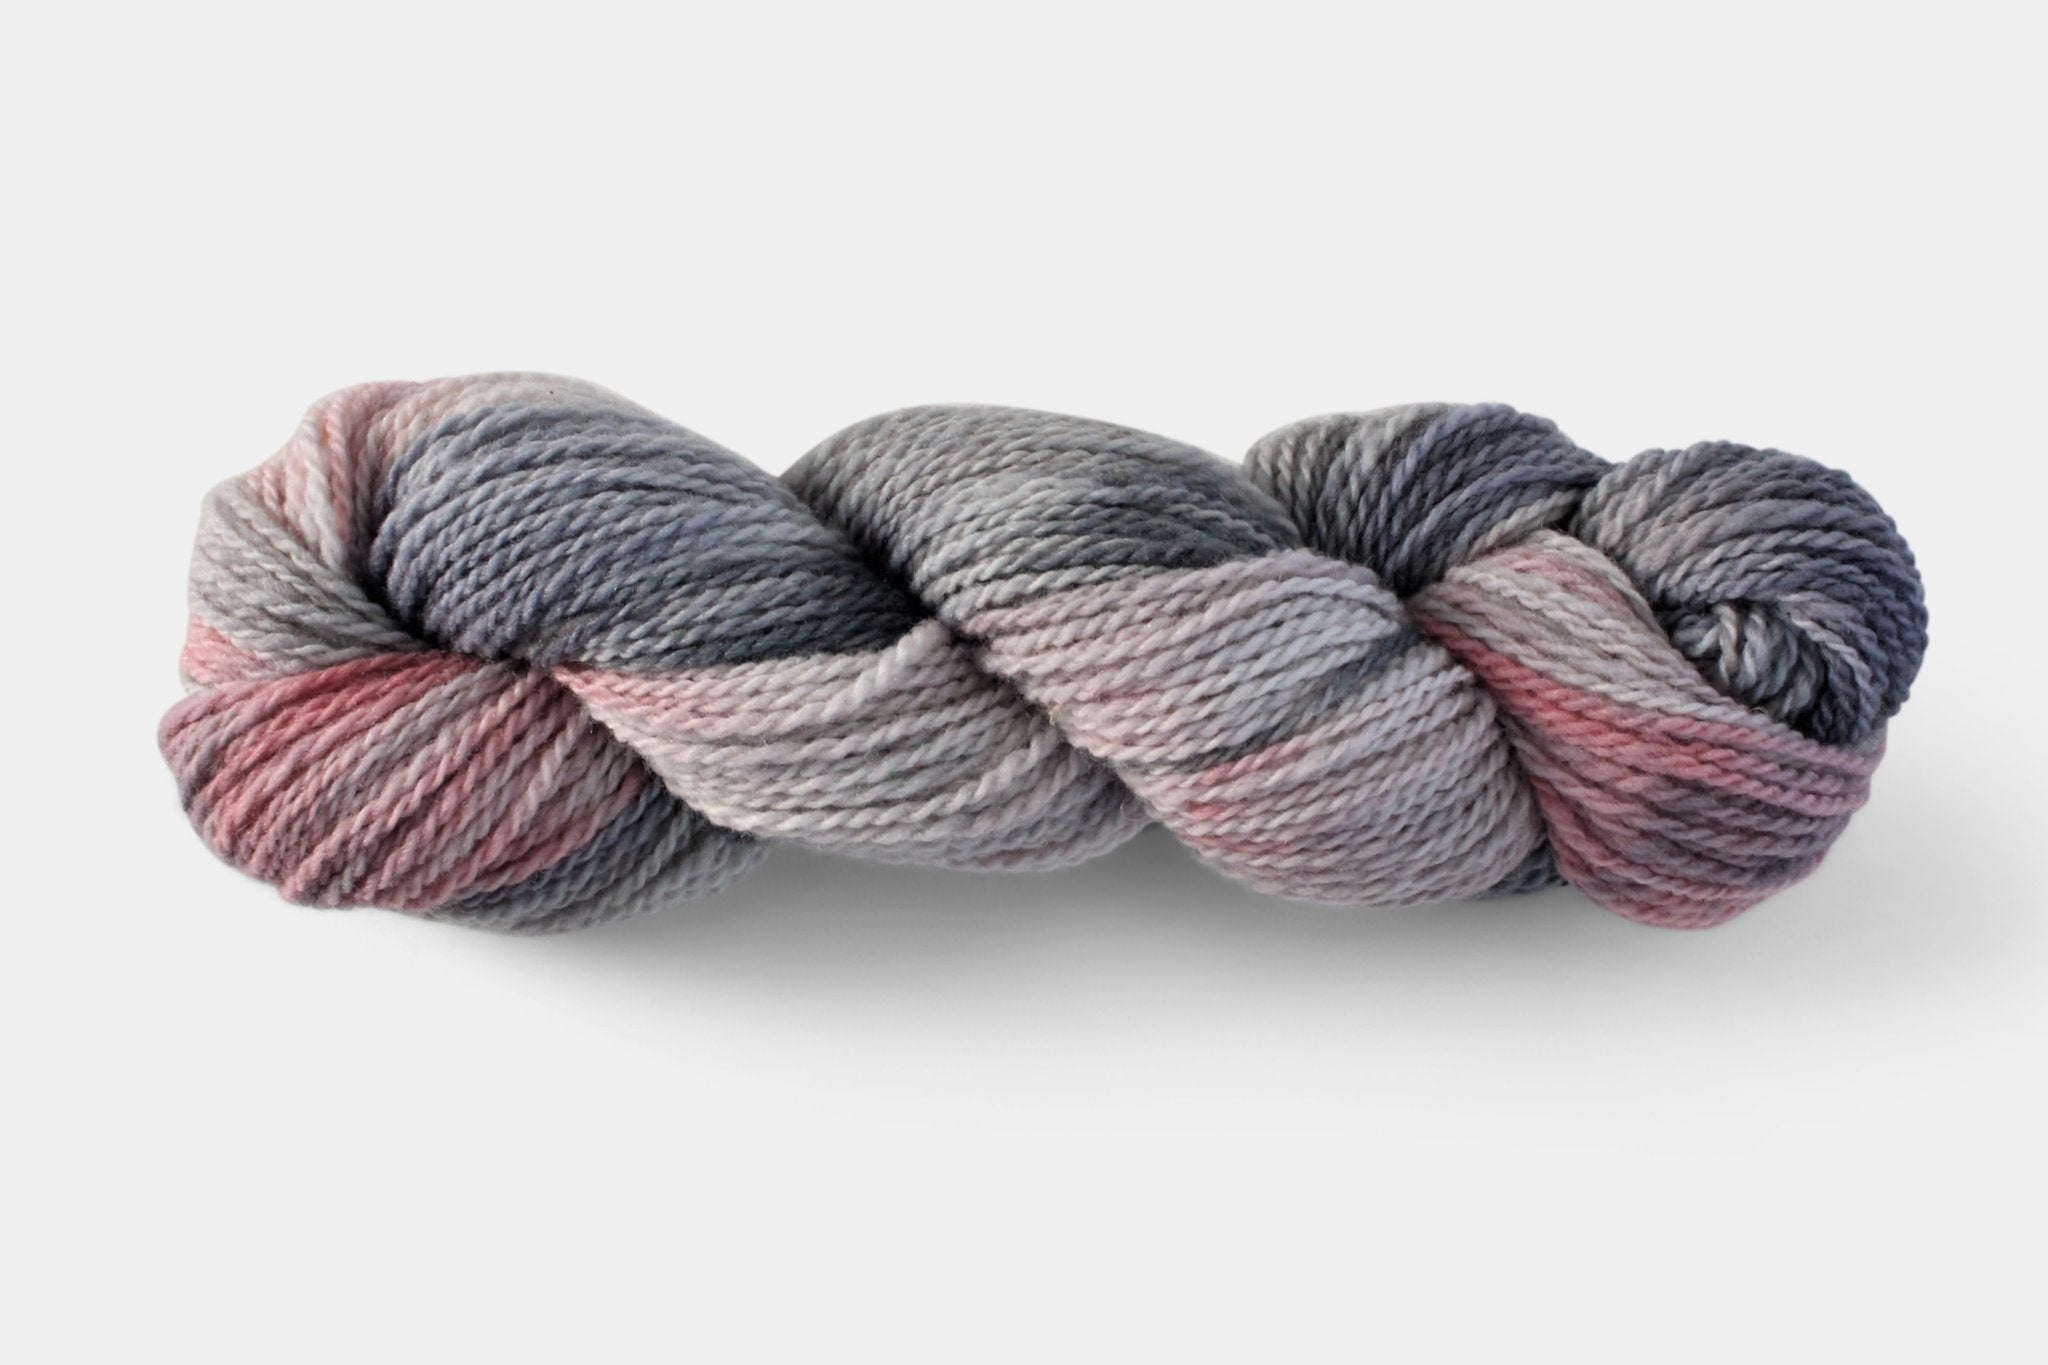 Fleece and Harmony Selkirk Worsted in Gale